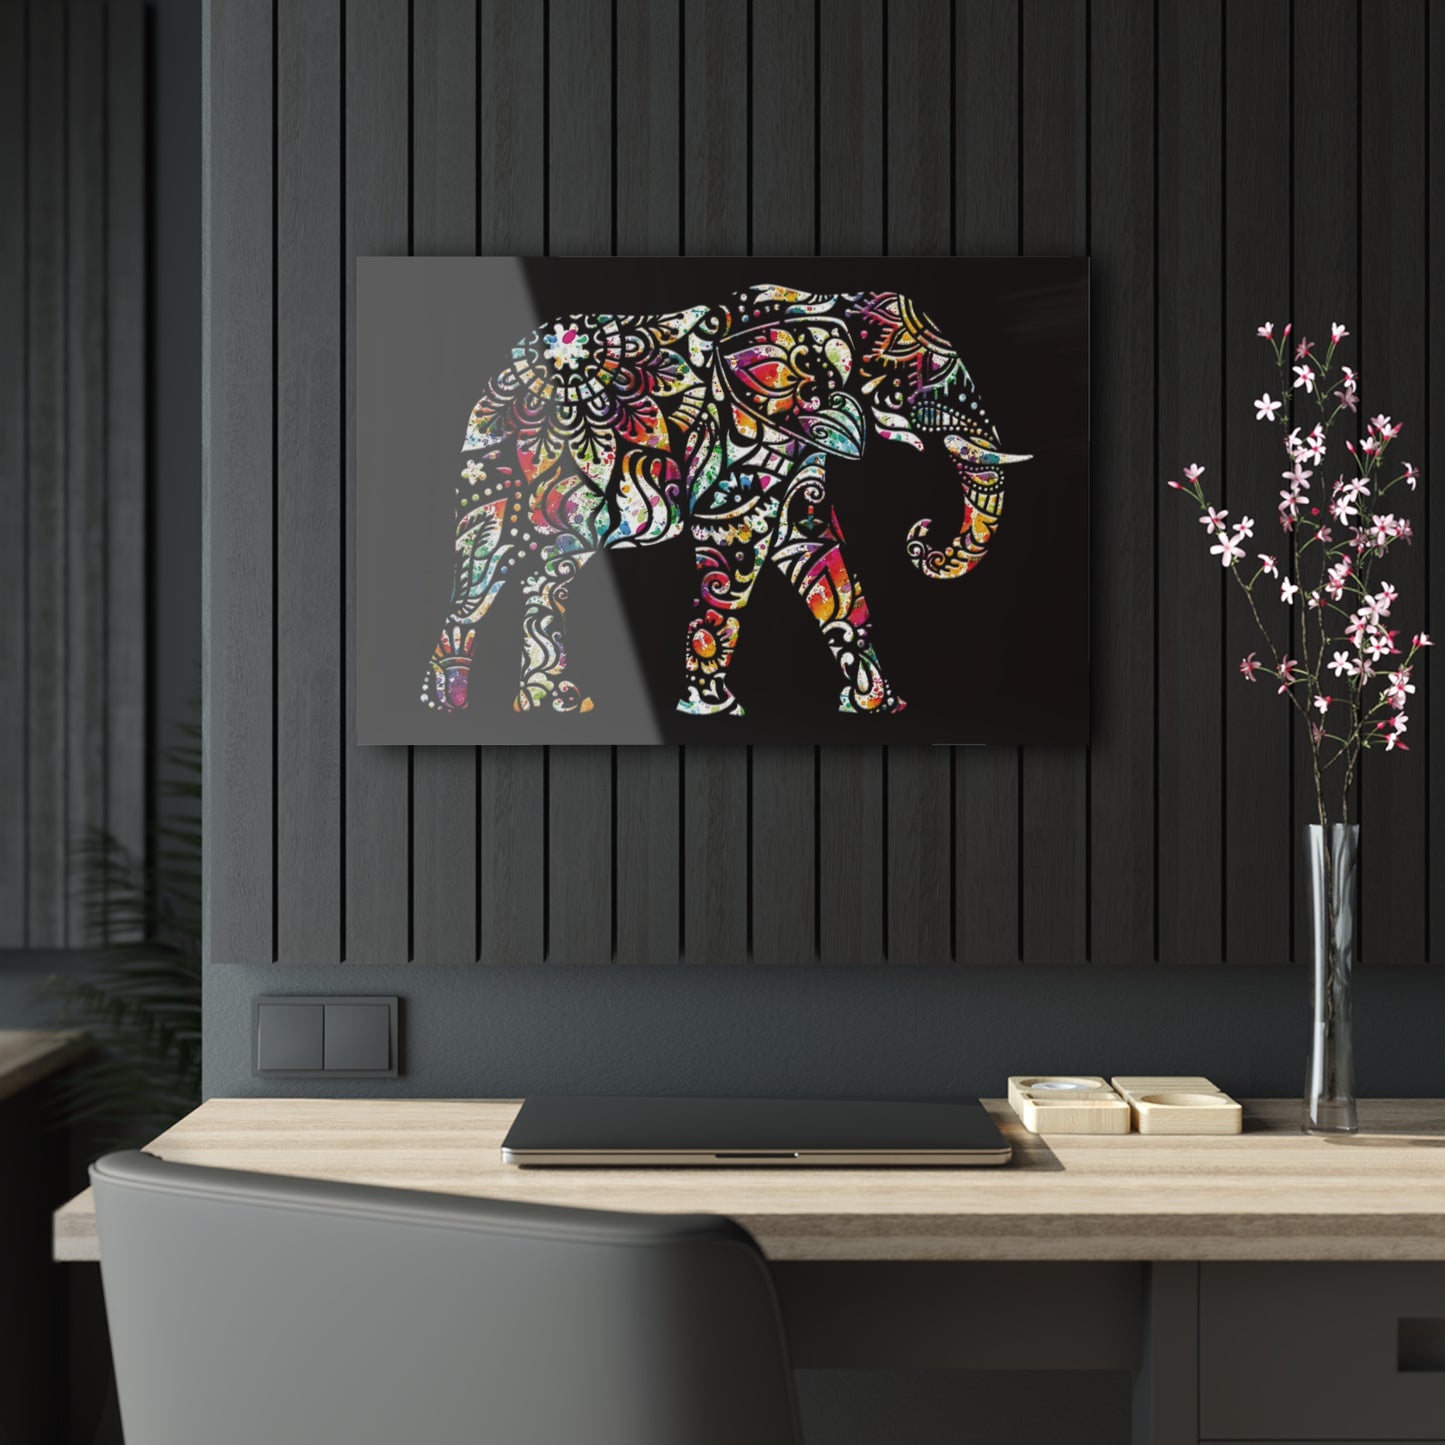 Elephant Themed Wall Art - Multicolor Indian Elephant on Black Background Printed on a Crystal Clear Acrylic Panel 30x20 hung on dark wall